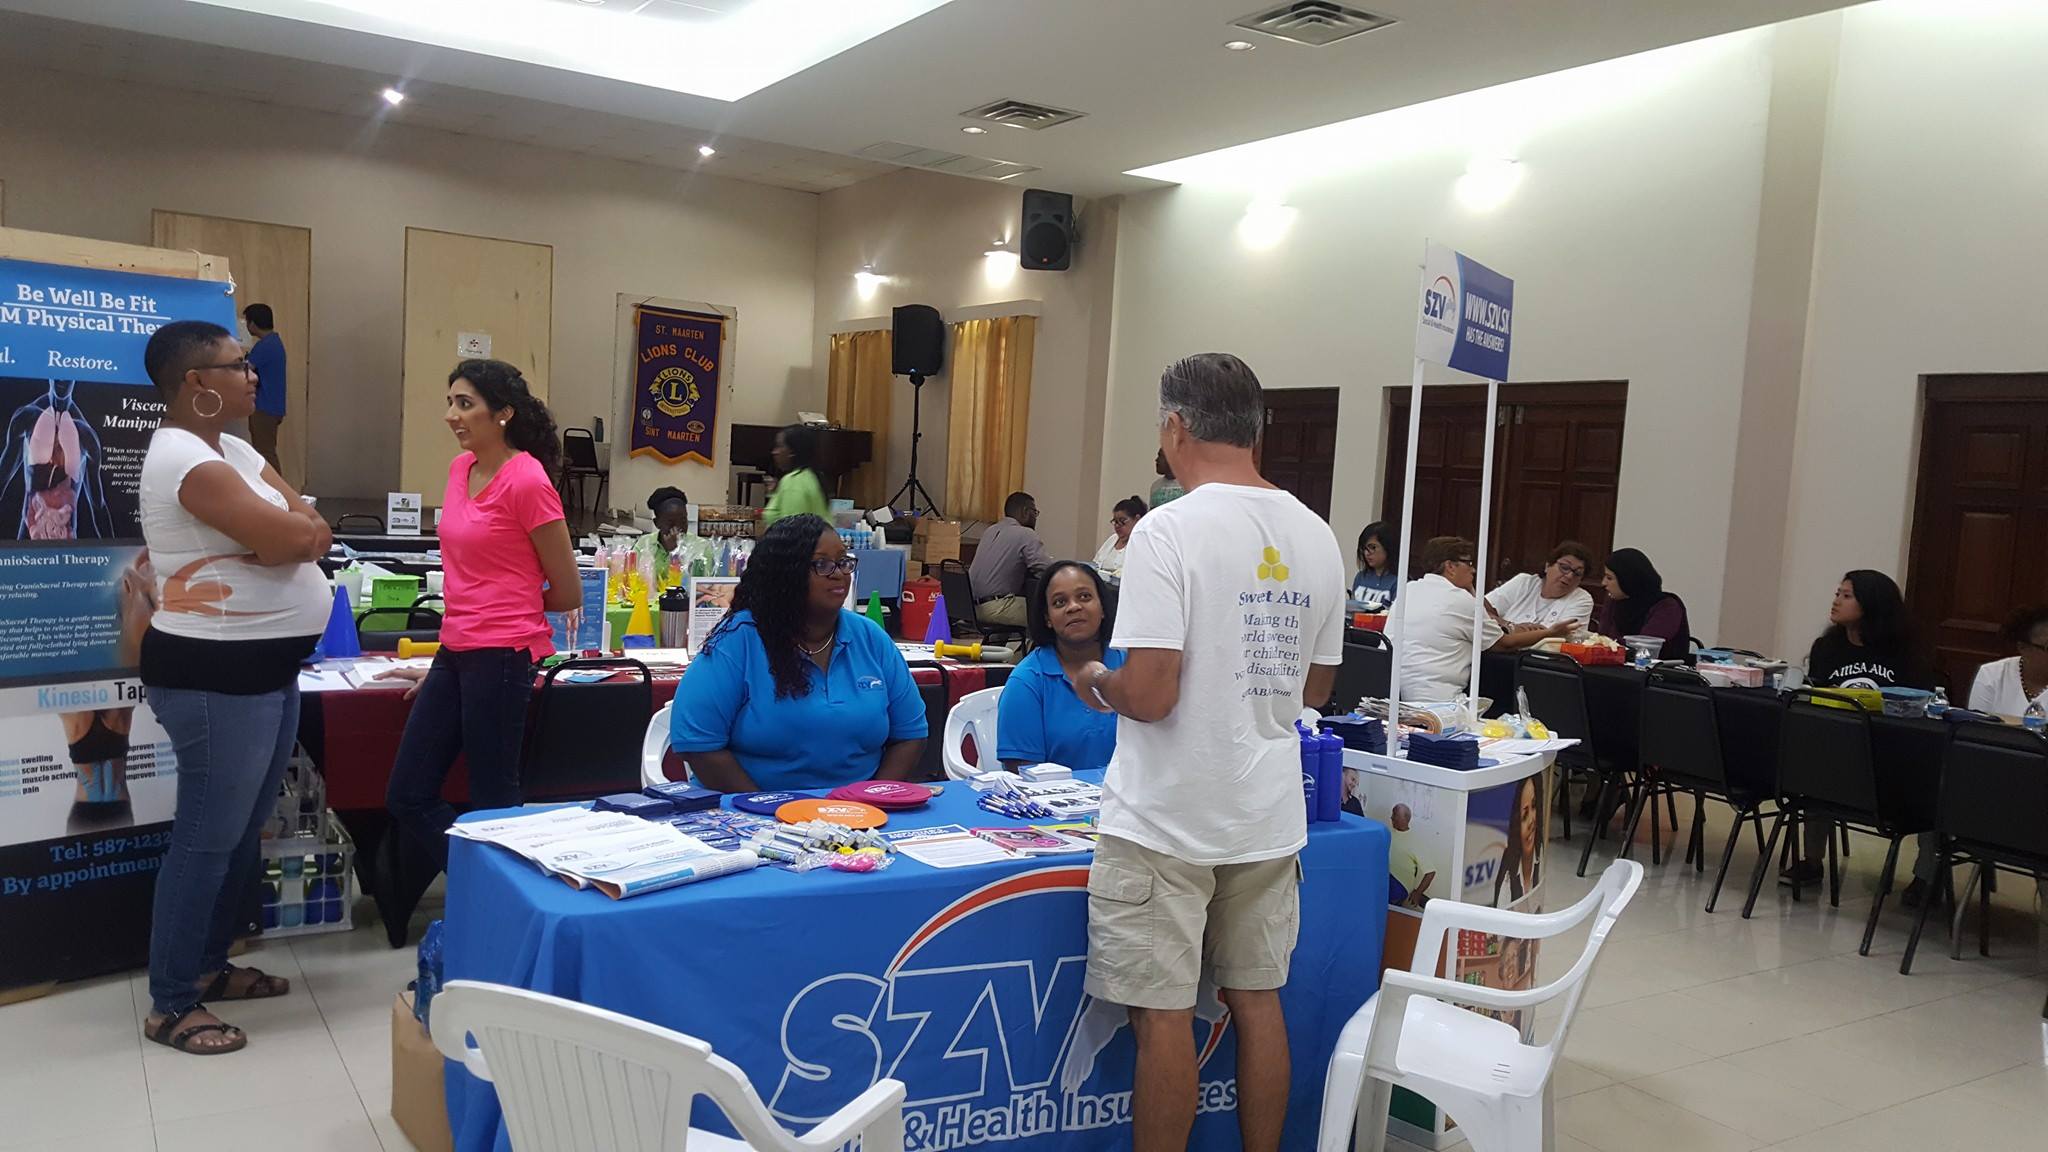 SZV ONLINE SERVICES PROMOTED AT HEALTH & WELLNESS FAIR  